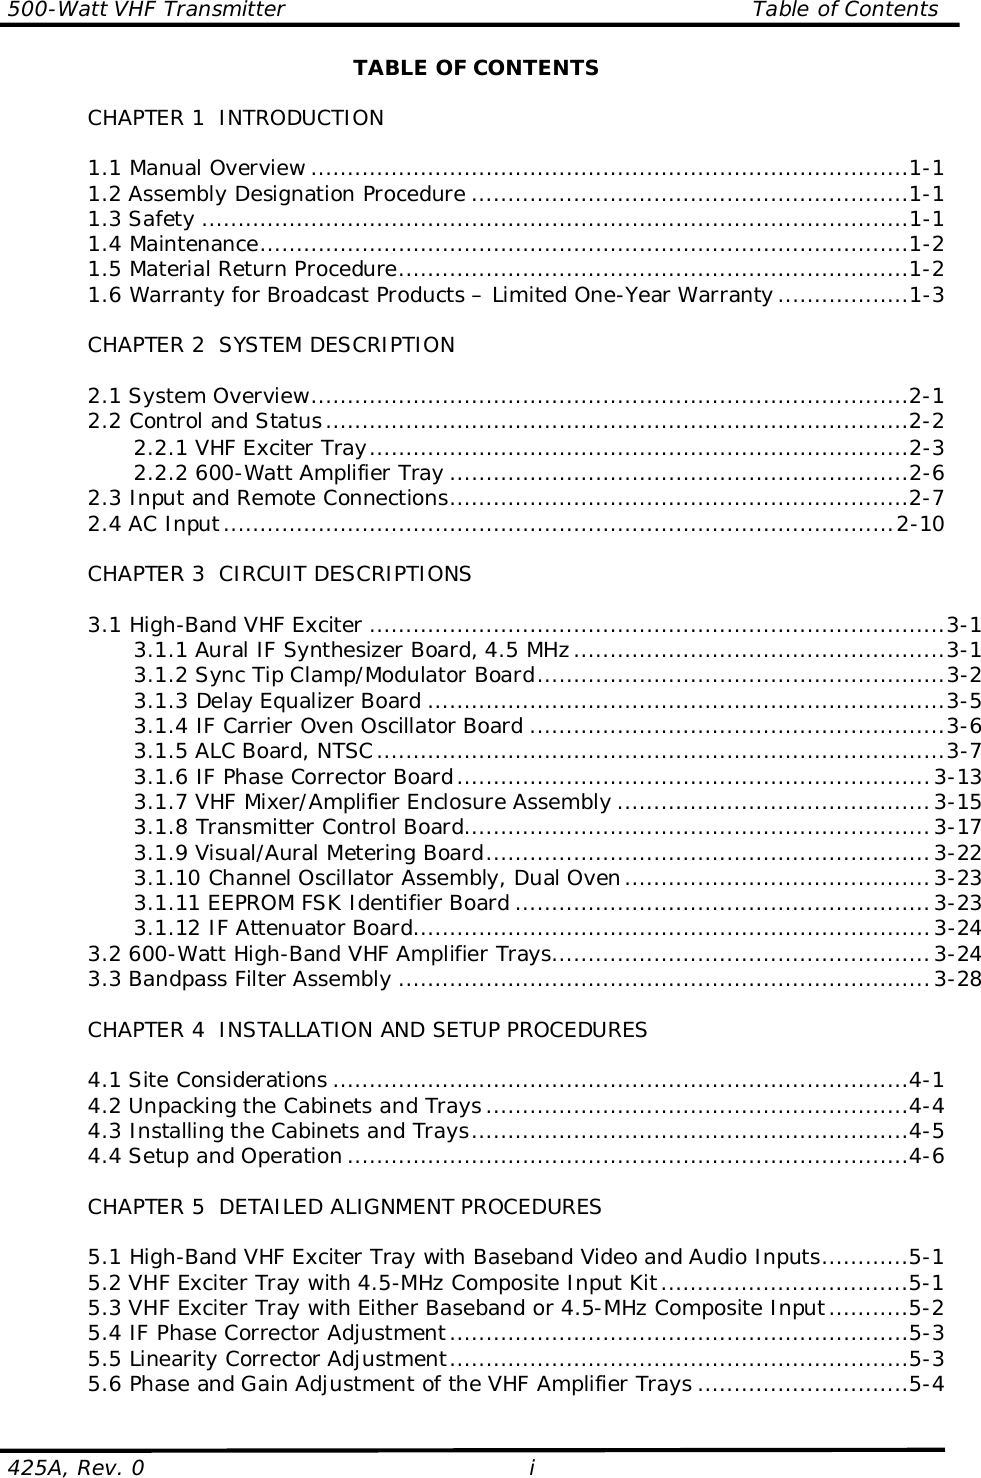 500-Watt VHF Transmitter                                                                Table of Contents425A, Rev. 0 iTABLE OF CONTENTSCHAPTER 1  INTRODUCTION1.1 Manual Overview ..................................................................................1-11.2 Assembly Designation Procedure ............................................................1-11.3 Safety .................................................................................................1-11.4 Maintenance.........................................................................................1-21.5 Material Return Procedure......................................................................1-21.6 Warranty for Broadcast Products – Limited One-Year Warranty ..................1-3CHAPTER 2  SYSTEM DESCRIPTION2.1 System Overview..................................................................................2-12.2 Control and Status................................................................................2-22.2.1 VHF Exciter Tray..........................................................................2-32.2.2 600-Watt Amplifier Tray ...............................................................2-62.3 Input and Remote Connections...............................................................2-72.4 AC Input............................................................................................2-10CHAPTER 3  CIRCUIT DESCRIPTIONS3.1 High-Band VHF Exciter ...............................................................................3-13.1.1 Aural IF Synthesizer Board, 4.5 MHz...................................................3-13.1.2 Sync Tip Clamp/Modulator Board........................................................3-23.1.3 Delay Equalizer Board .......................................................................3-53.1.4 IF Carrier Oven Oscillator Board .........................................................3-63.1.5 ALC Board, NTSC..............................................................................3-73.1.6 IF Phase Corrector Board.................................................................3-133.1.7 VHF Mixer/Amplifier Enclosure Assembly ...........................................3-153.1.8 Transmitter Control Board................................................................3-173.1.9 Visual/Aural Metering Board.............................................................3-223.1.10 Channel Oscillator Assembly, Dual Oven..........................................3-233.1.11 EEPROM FSK Identifier Board .........................................................3-233.1.12 IF Attenuator Board.......................................................................3-243.2 600-Watt High-Band VHF Amplifier Trays....................................................3-243.3 Bandpass Filter Assembly .........................................................................3-28CHAPTER 4  INSTALLATION AND SETUP PROCEDURES4.1 Site Considerations ...............................................................................4-14.2 Unpacking the Cabinets and Trays ..........................................................4-44.3 Installing the Cabinets and Trays............................................................4-54.4 Setup and Operation .............................................................................4-6CHAPTER 5  DETAILED ALIGNMENT PROCEDURES5.1 High-Band VHF Exciter Tray with Baseband Video and Audio Inputs............5-15.2 VHF Exciter Tray with 4.5-MHz Composite Input Kit..................................5-15.3 VHF Exciter Tray with Either Baseband or 4.5-MHz Composite Input...........5-25.4 IF Phase Corrector Adjustment...............................................................5-35.5 Linearity Corrector Adjustment...............................................................5-35.6 Phase and Gain Adjustment of the VHF Amplifier Trays .............................5-4